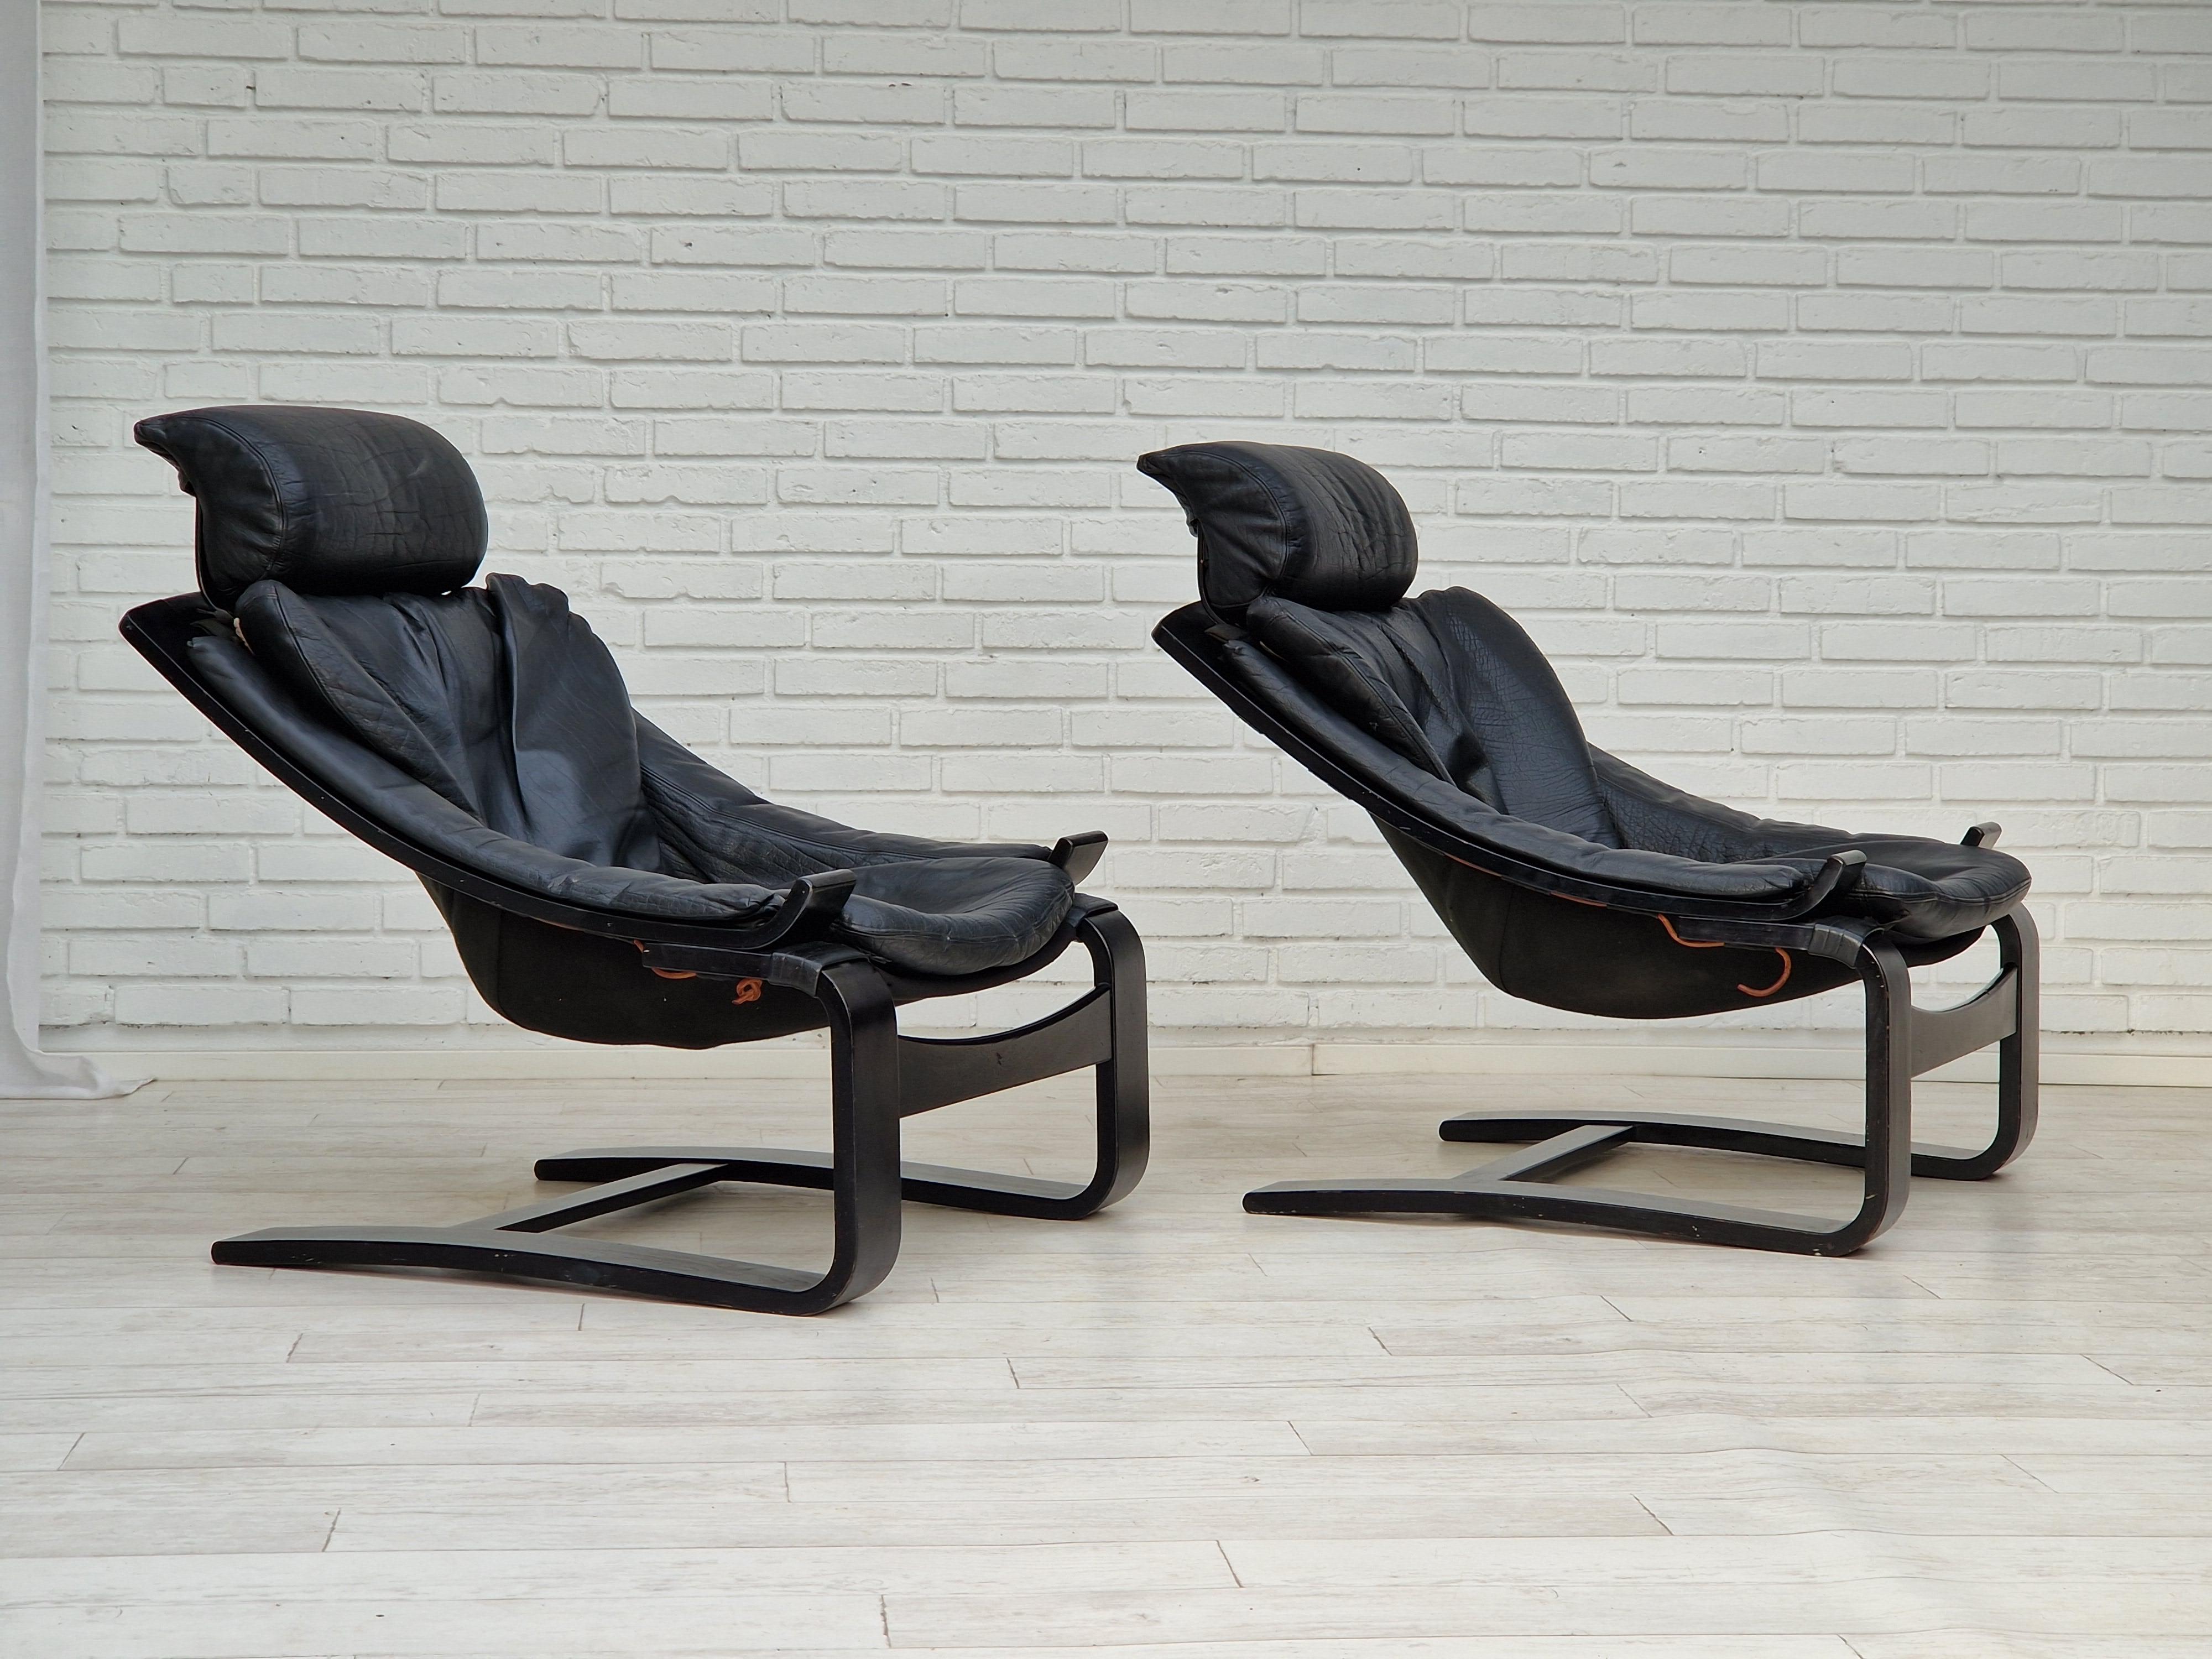 70s, Swedish design by Ake Fribyter. Set of two Kroken lounge chair. Original upholstery in black leather. Removable headrest and seat with backrest. Adjustable headrest. Original very good condition. No smells, no stains. Manufactured by the